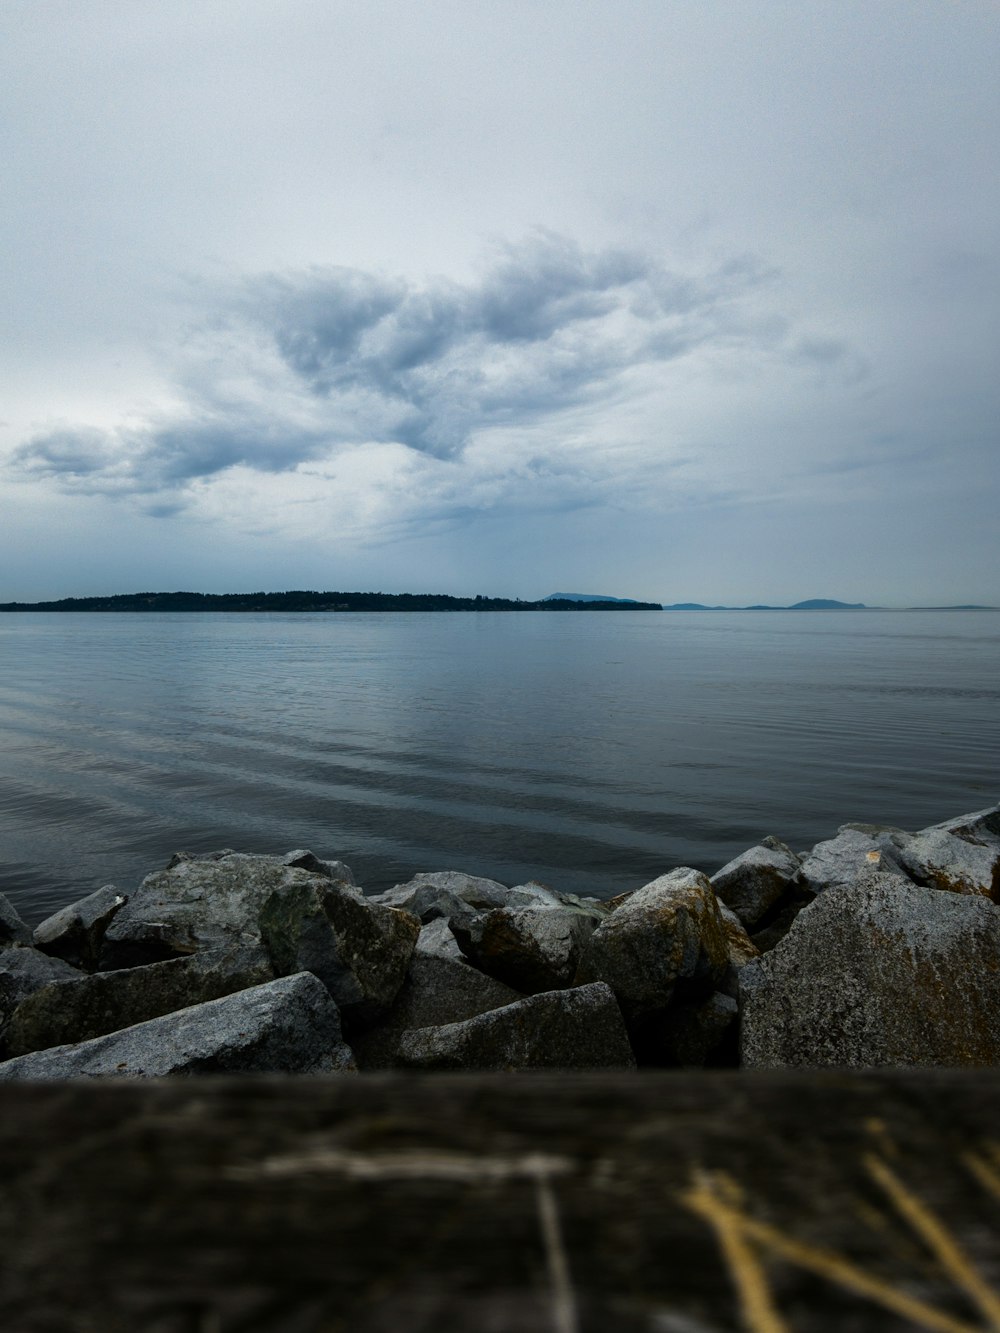 gray rocks near body of water under cloudy sky during daytime